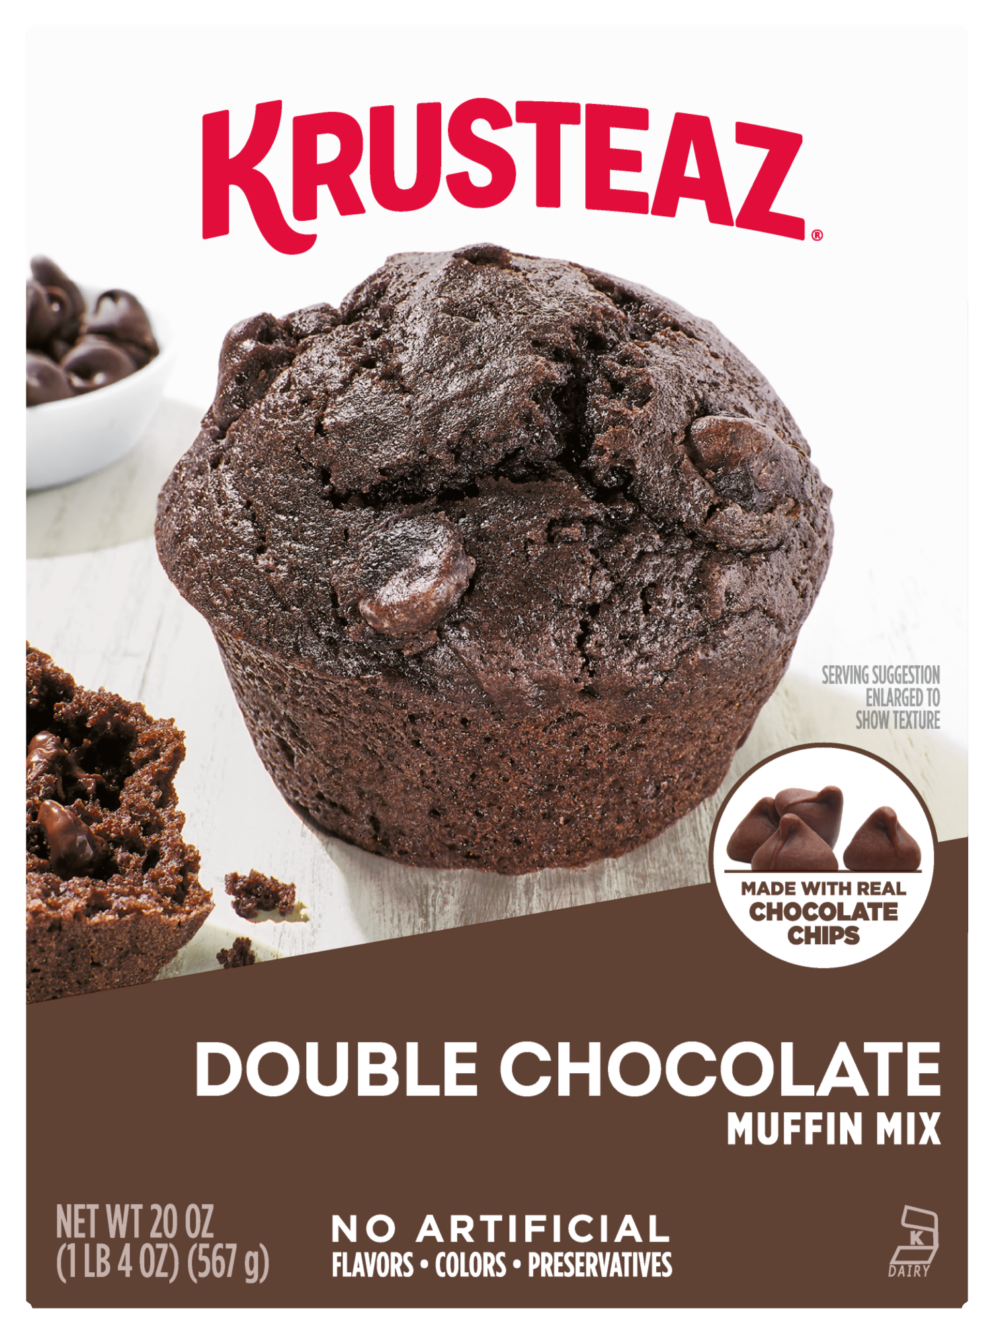 Box of Krusteaz Double Chocolate Muffin Mix.